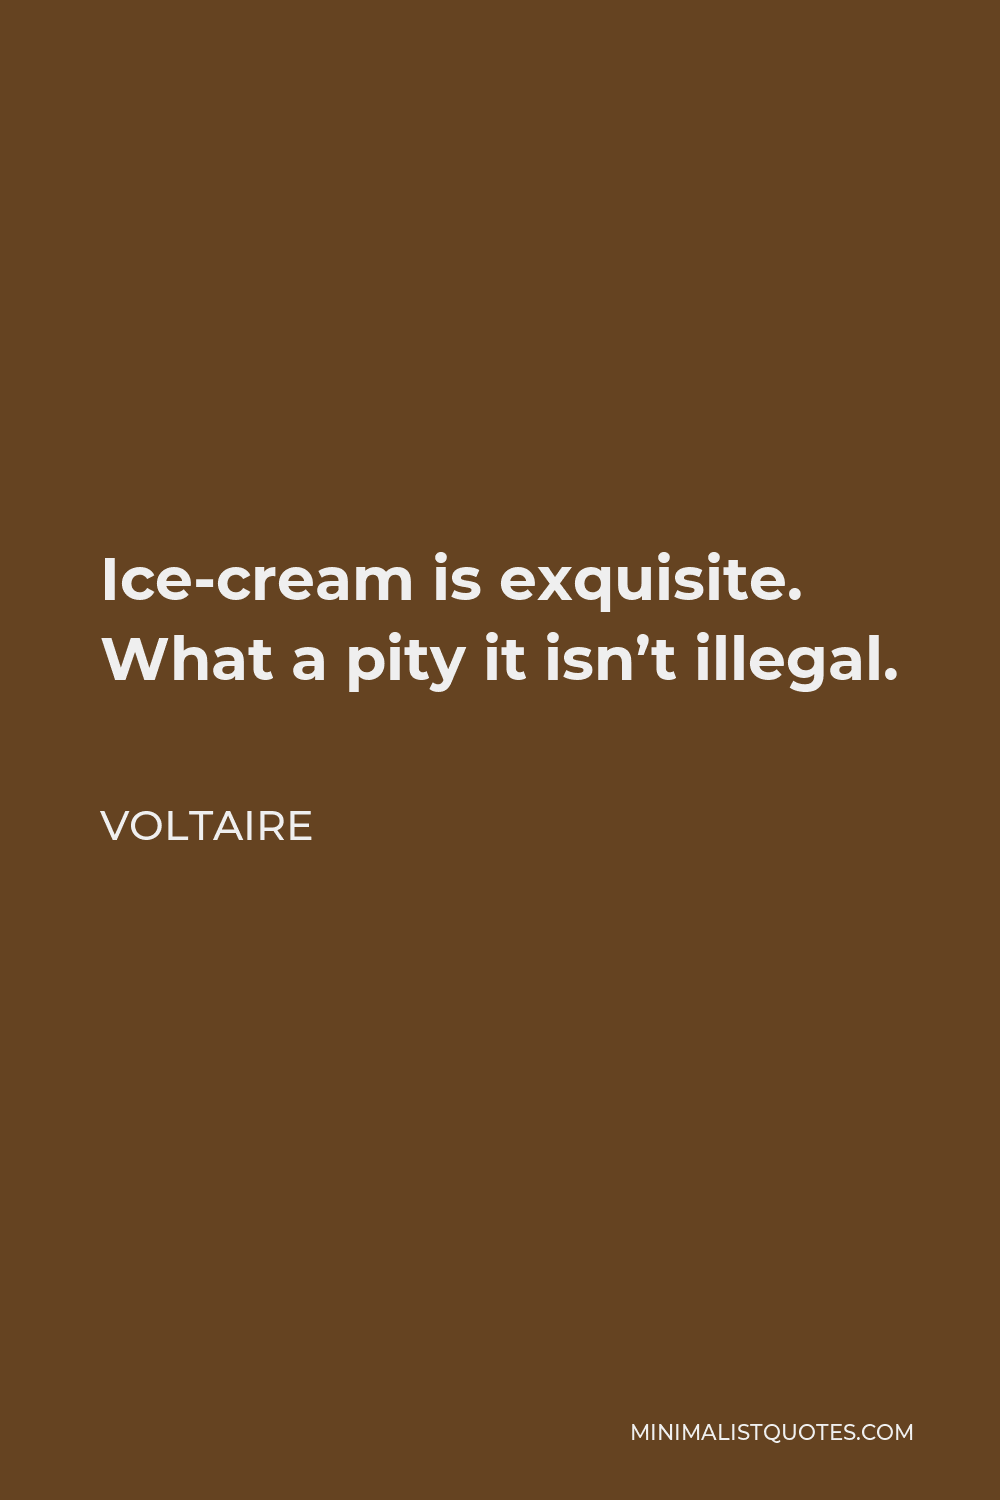 Voltaire Quote - Ice-cream is exquisite. What a pity it isn’t illegal.